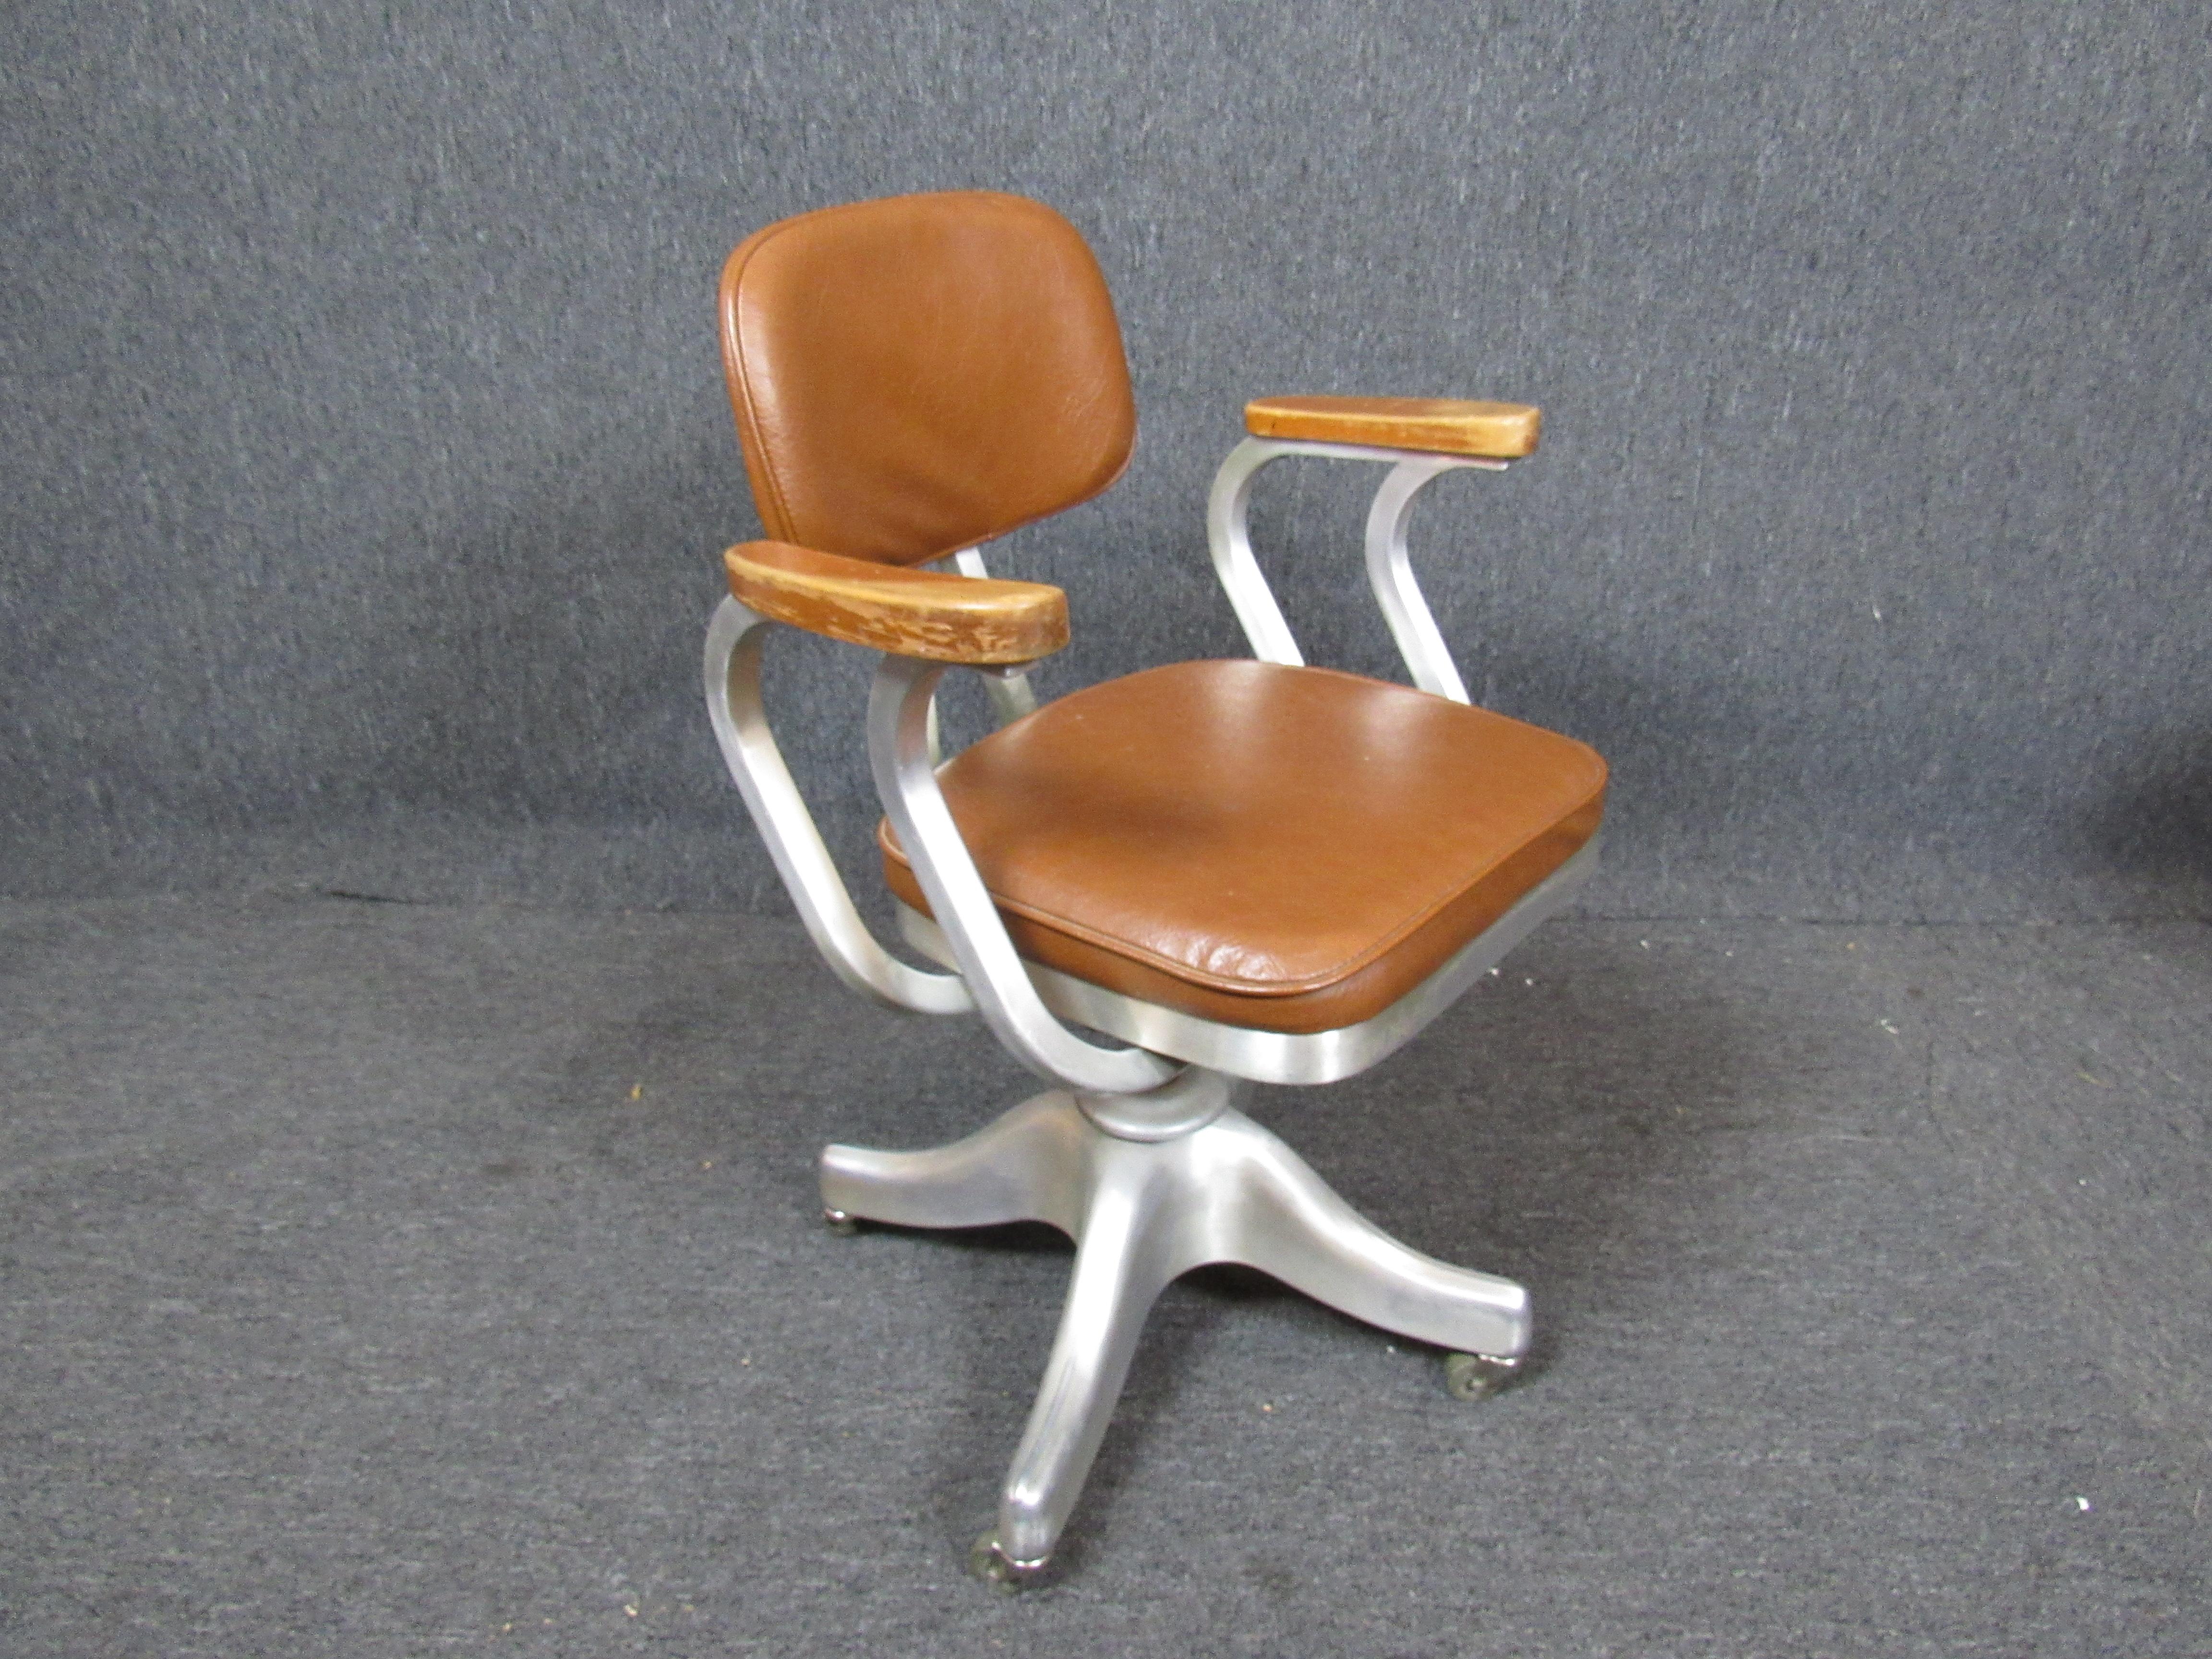 Mid-century modern style office chair by Shaw Walker with aluminum frame and wood arm rests.
Please confirm location NY or NJ.